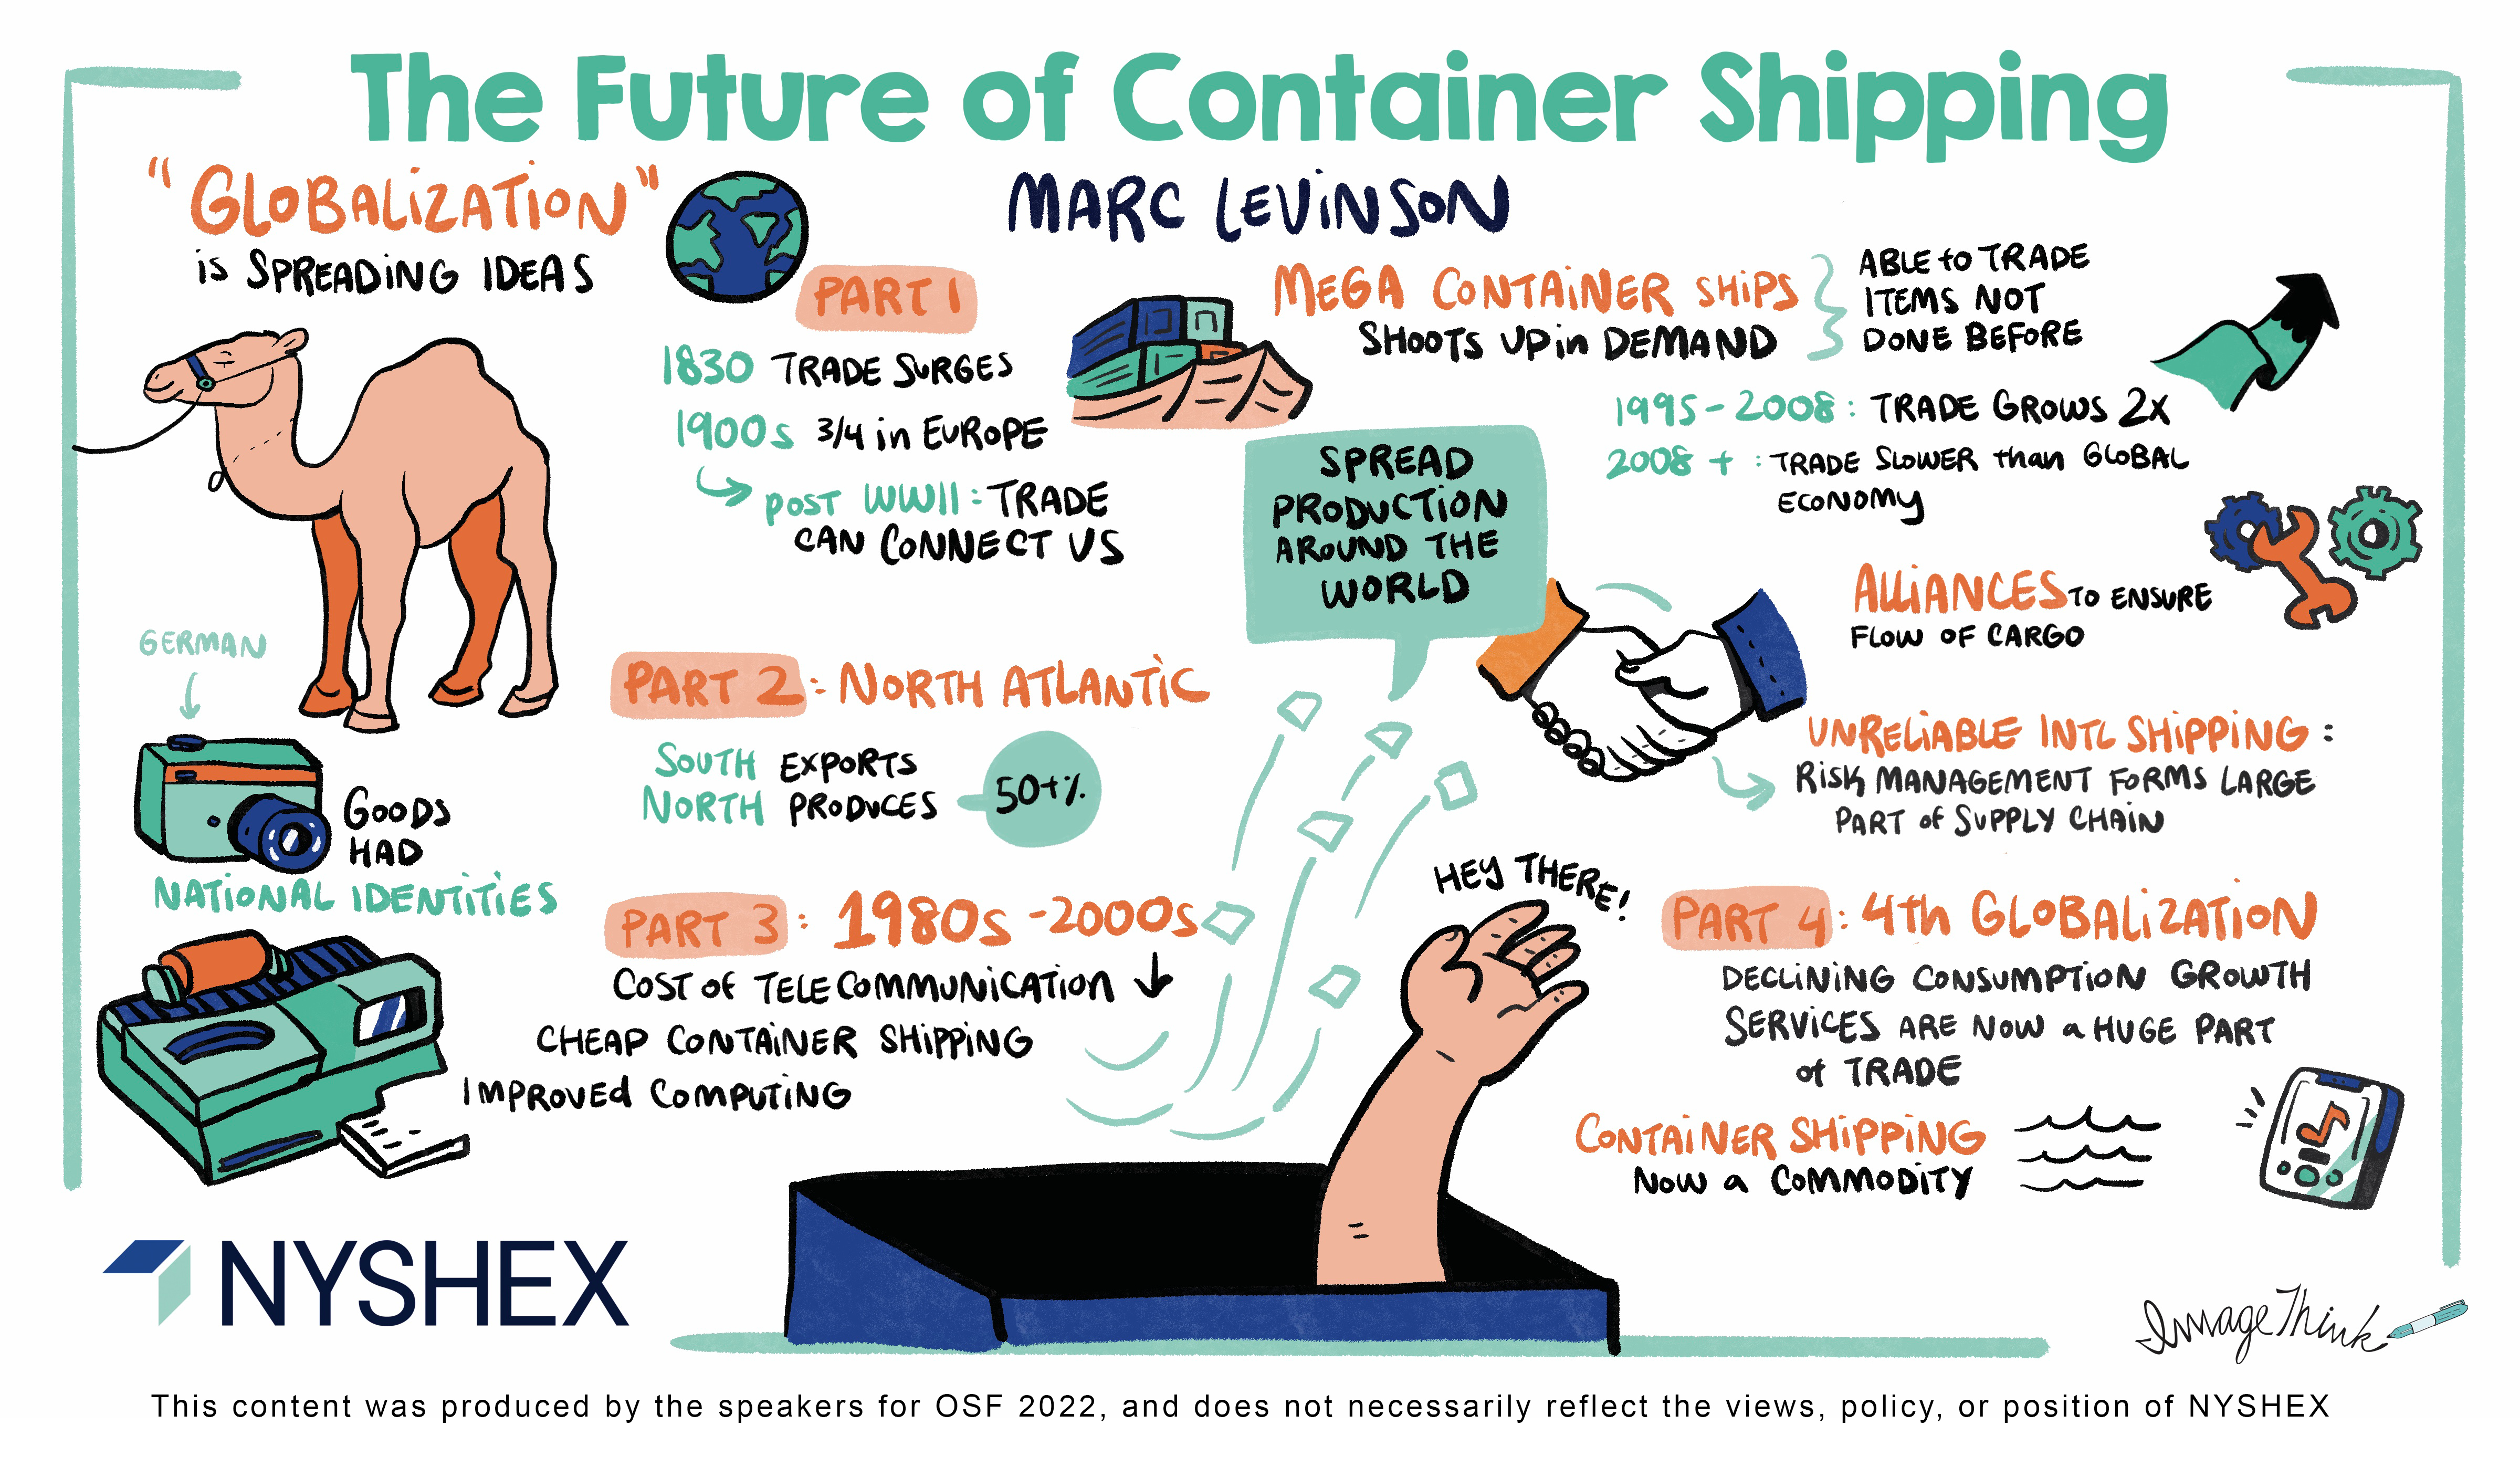 The Future of Container Shipping